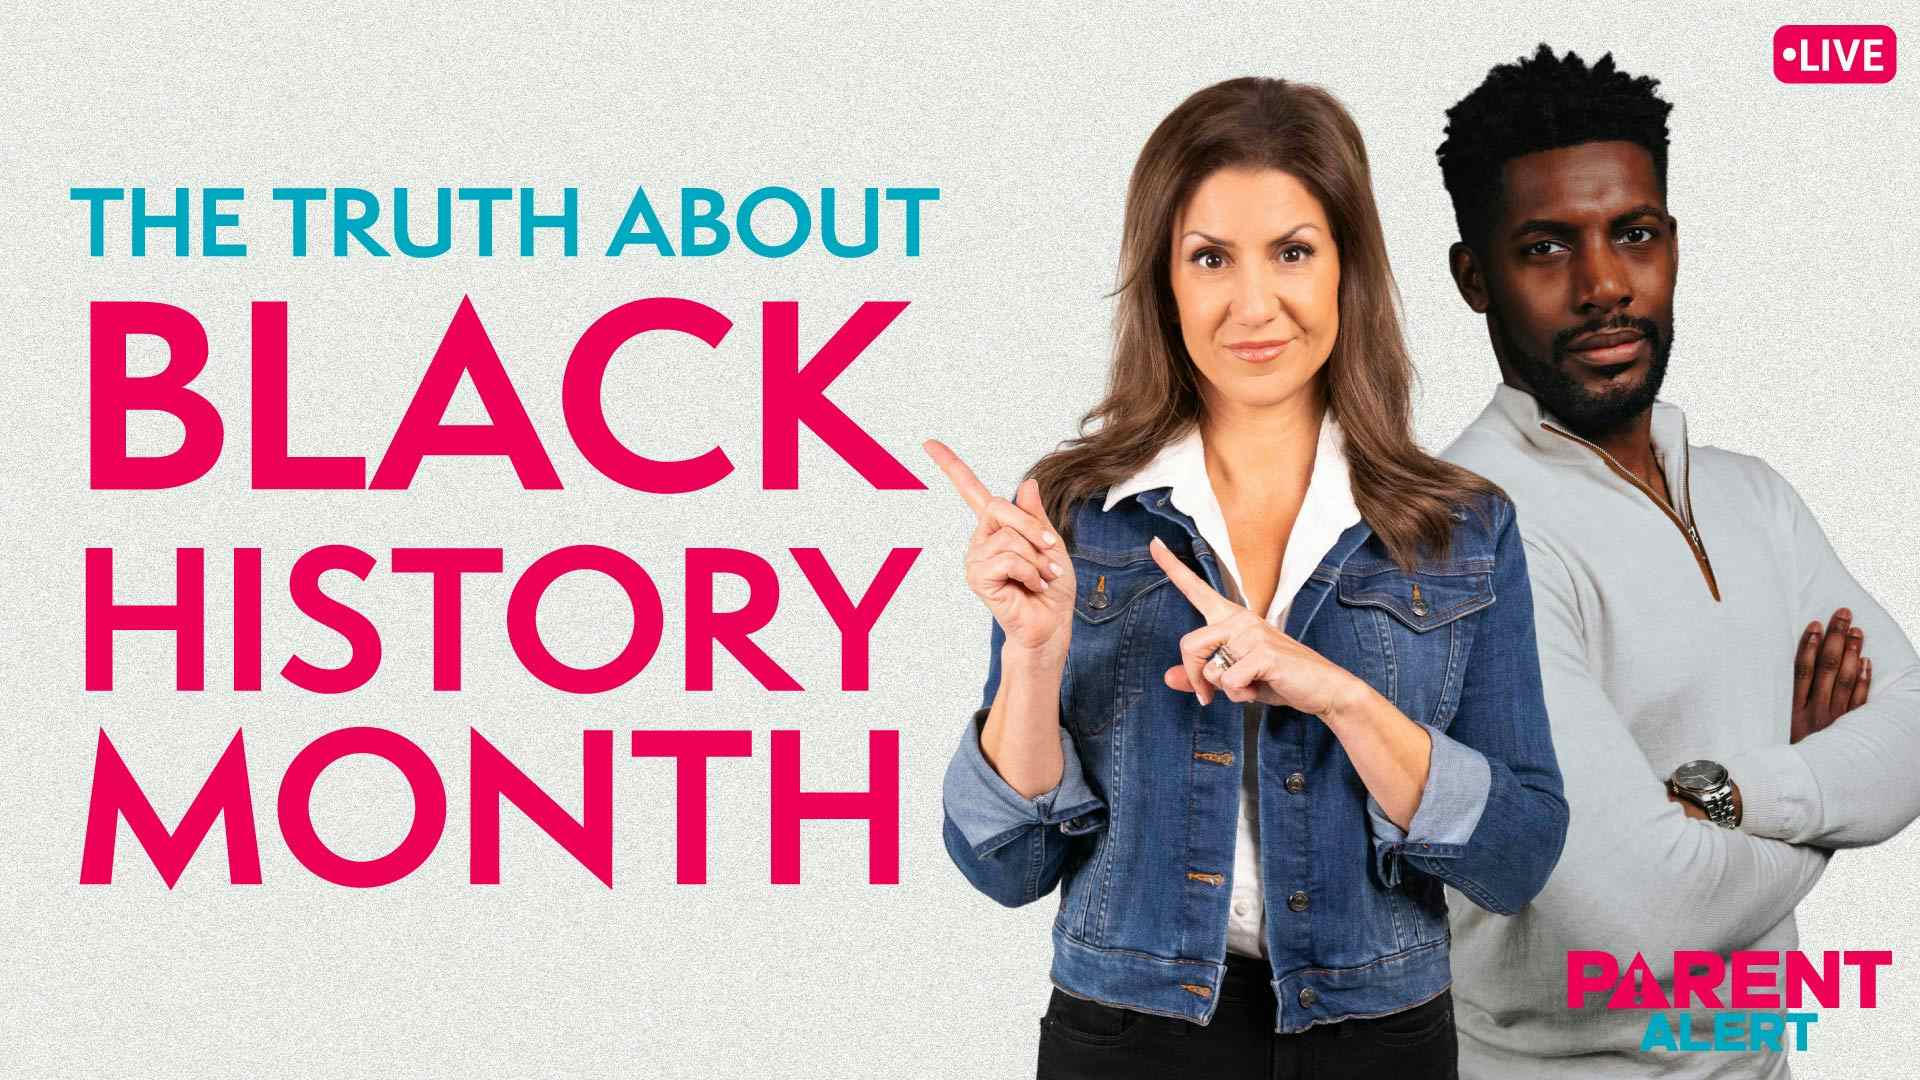 Parent Alert: The Truth about Black History Month